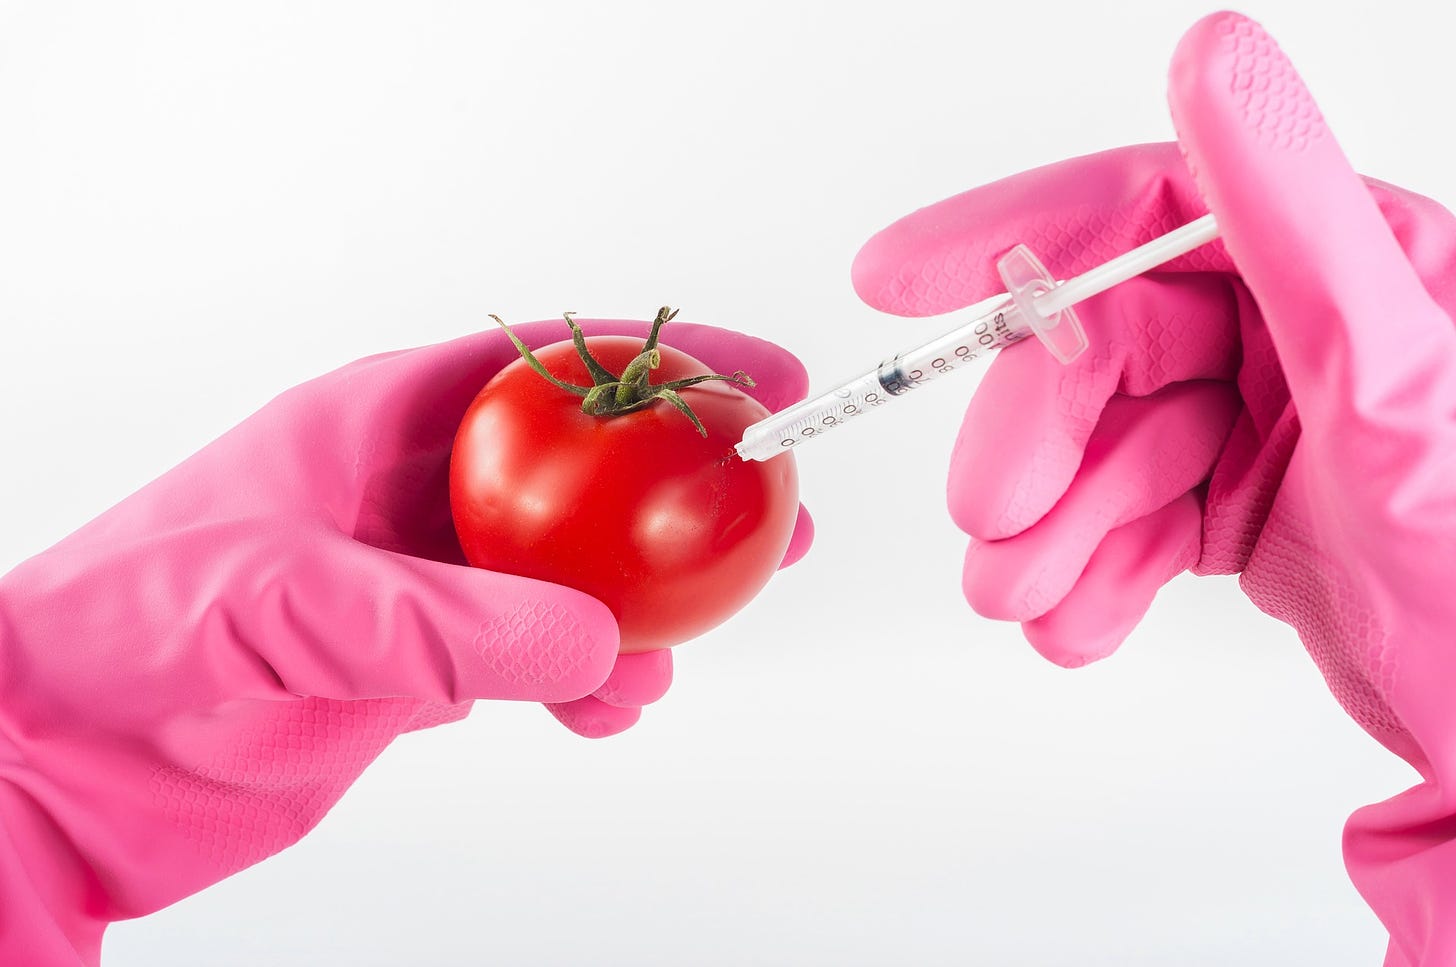 I really wish I could draw what I imagine in my head. Picture shows hands with pink kitchen gloves holding a syringe and a tomato. This is not how food is modified. Really.